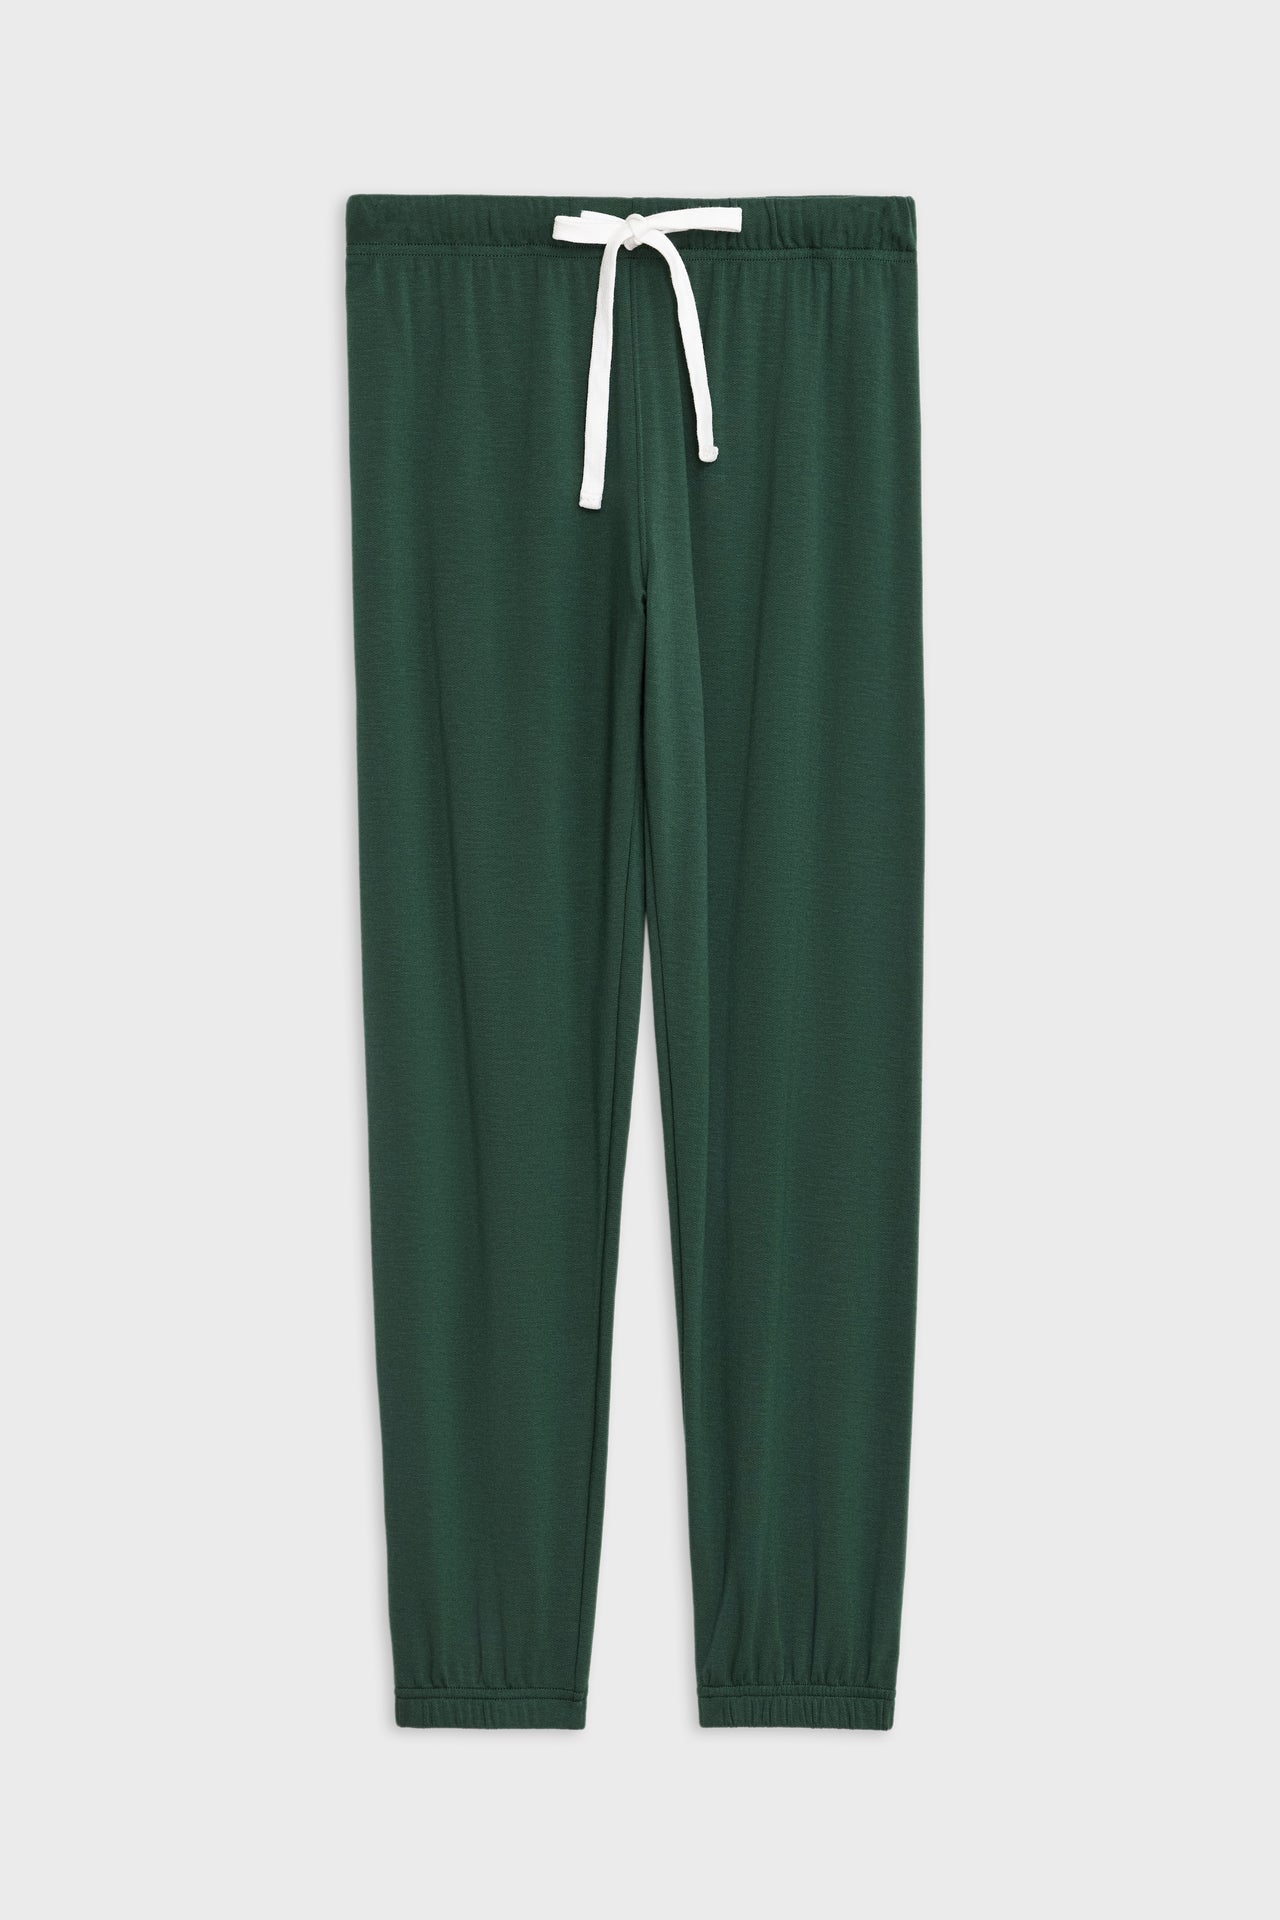 Front flat view of  dark green sweatpant jogger with white drawstring